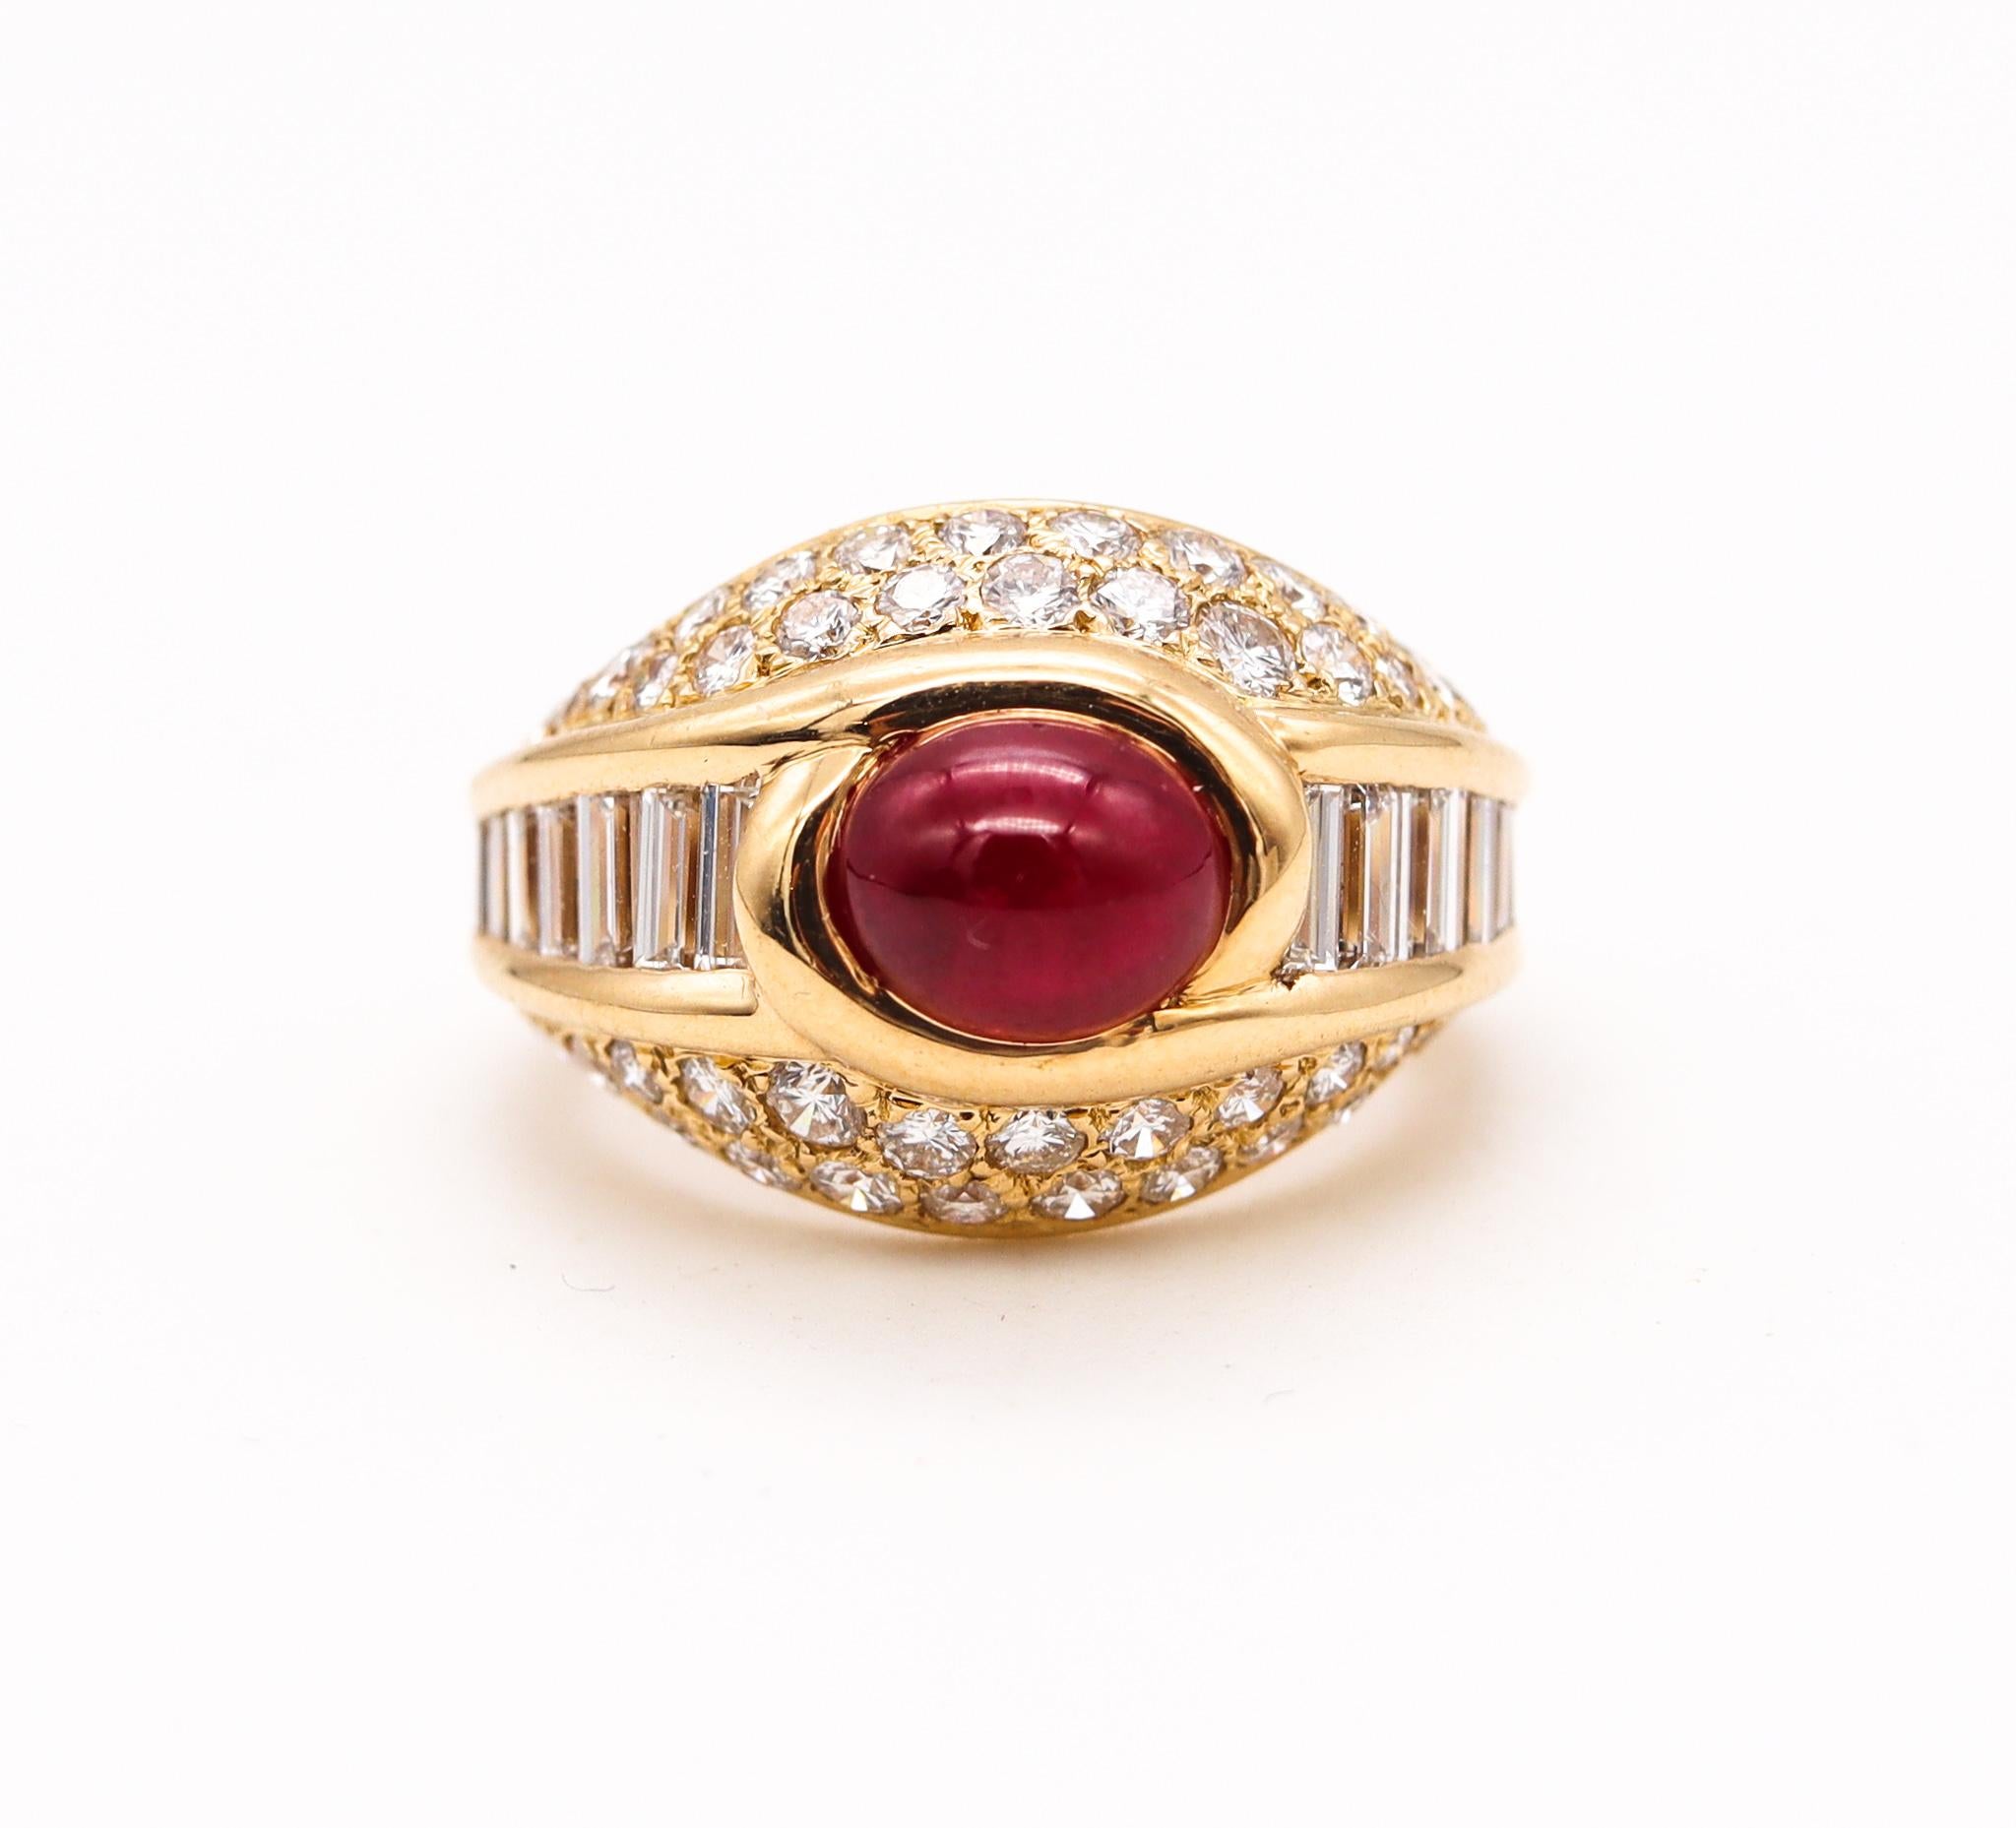 Cartier Paris Cocktail Ring in 18Kt Yellow Gold 4.49 Cts Burmese Ruby Diamonds 1